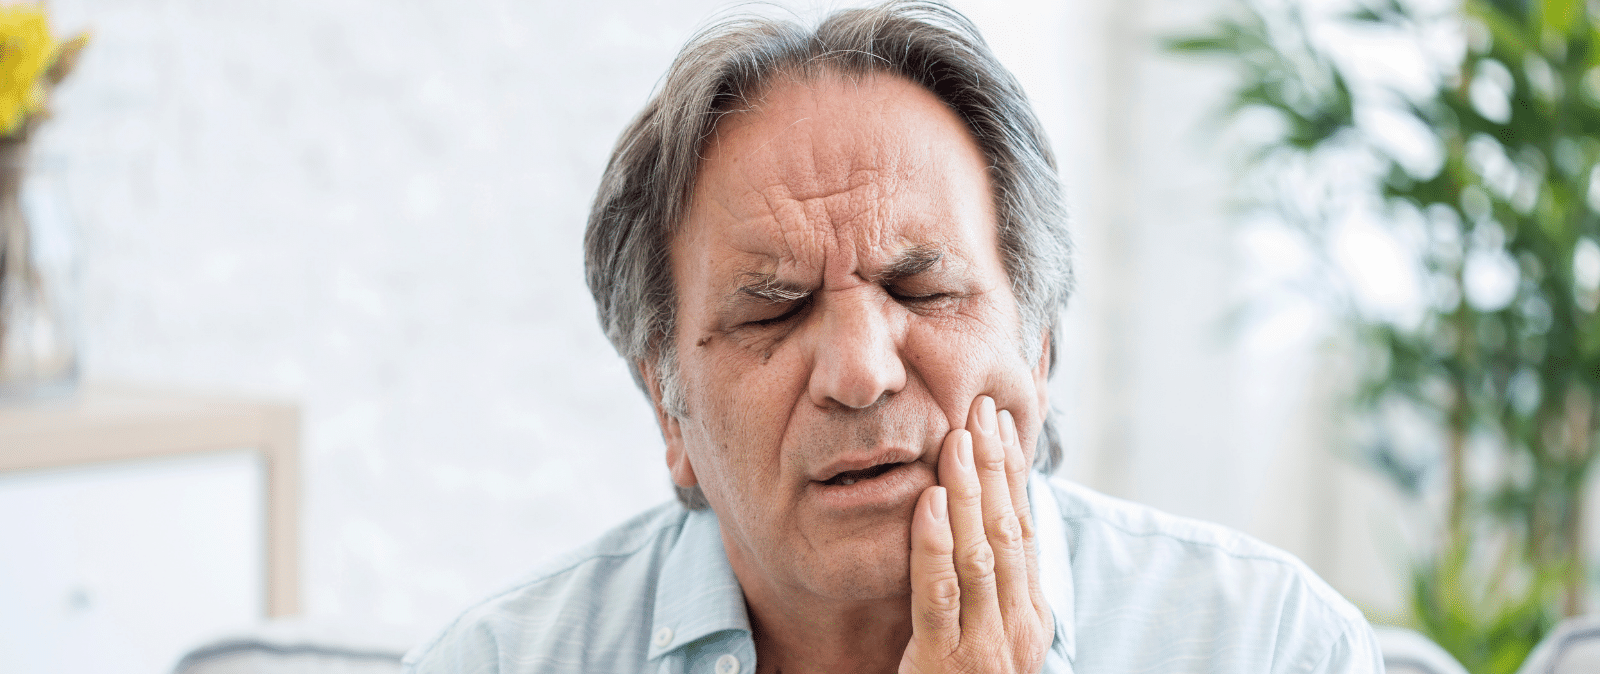 Signs You Need a tooth extraction